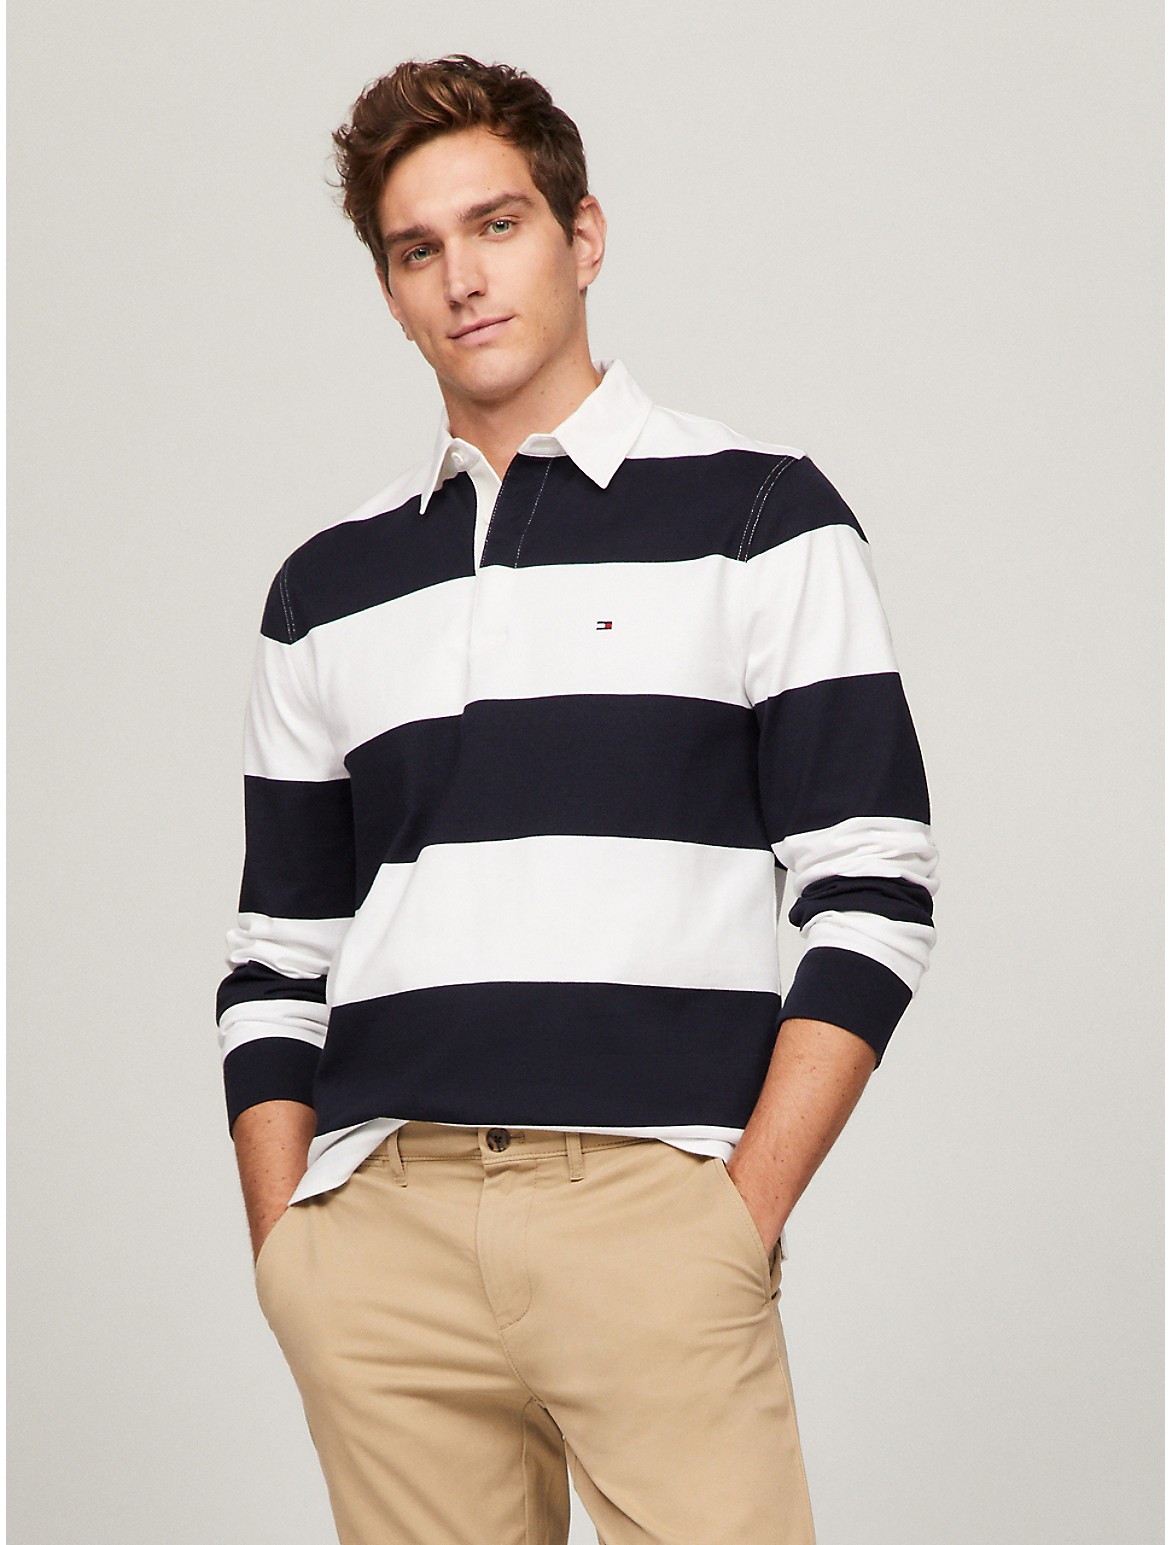 Tommy Hilfiger Men's Regular Fit Rugby Long-Sleeve Polo